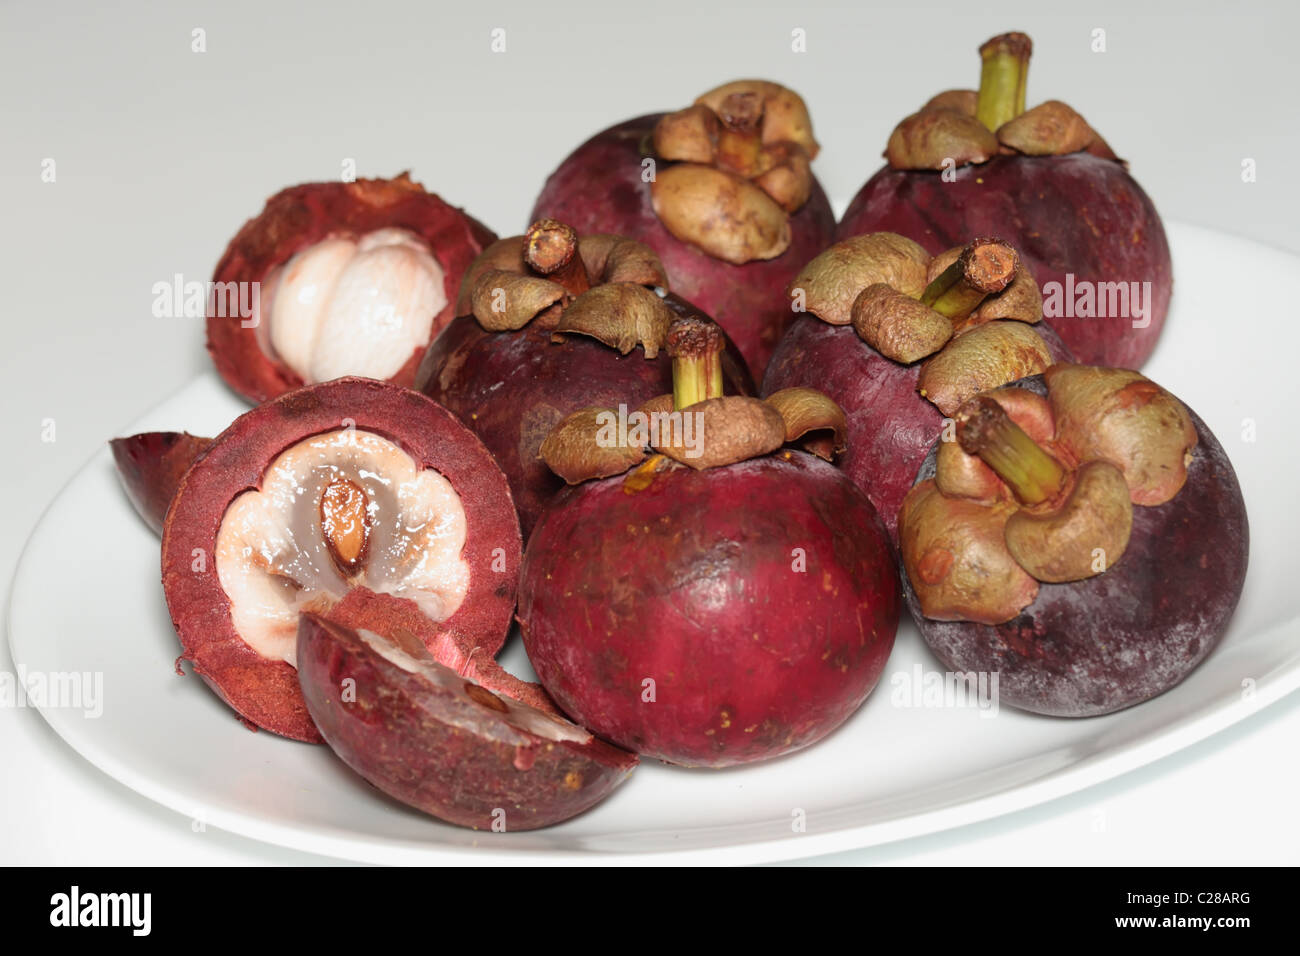 A Plate of Mangosteen Stock Photo